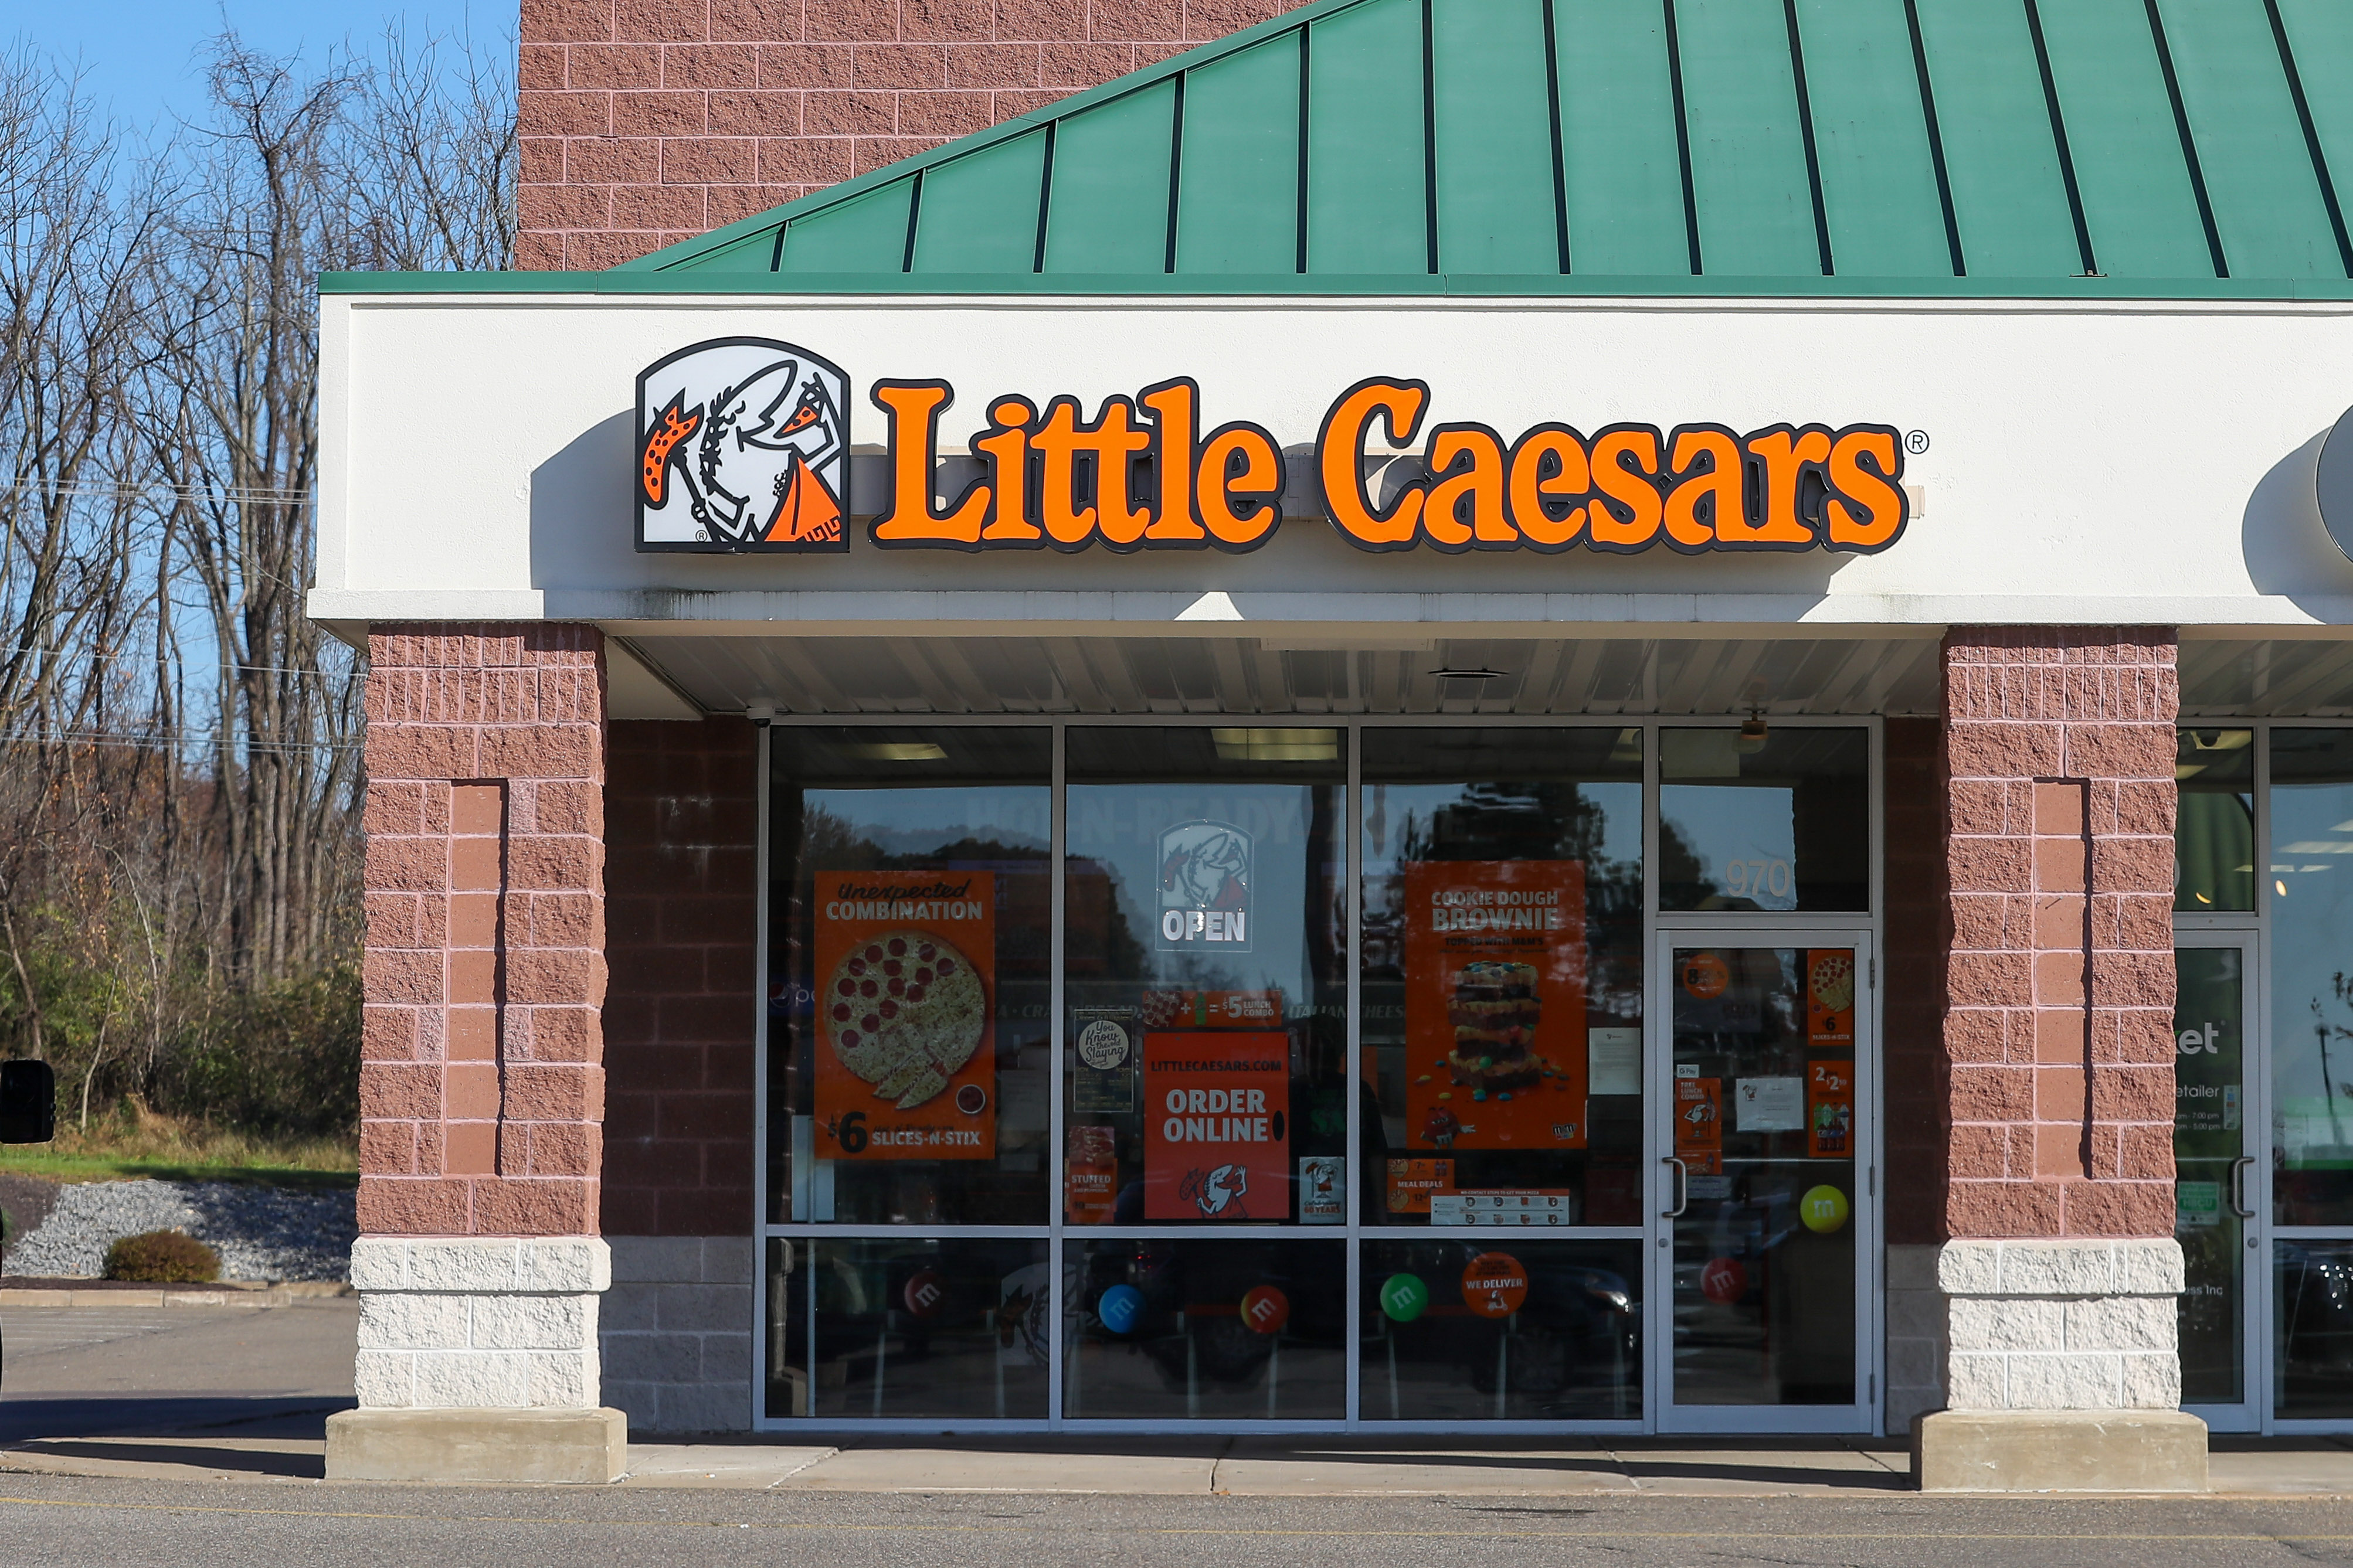 Little Caesars named official pizza sponsor of the NFL, fans bring the jokes They finally out-pizzad the Hut